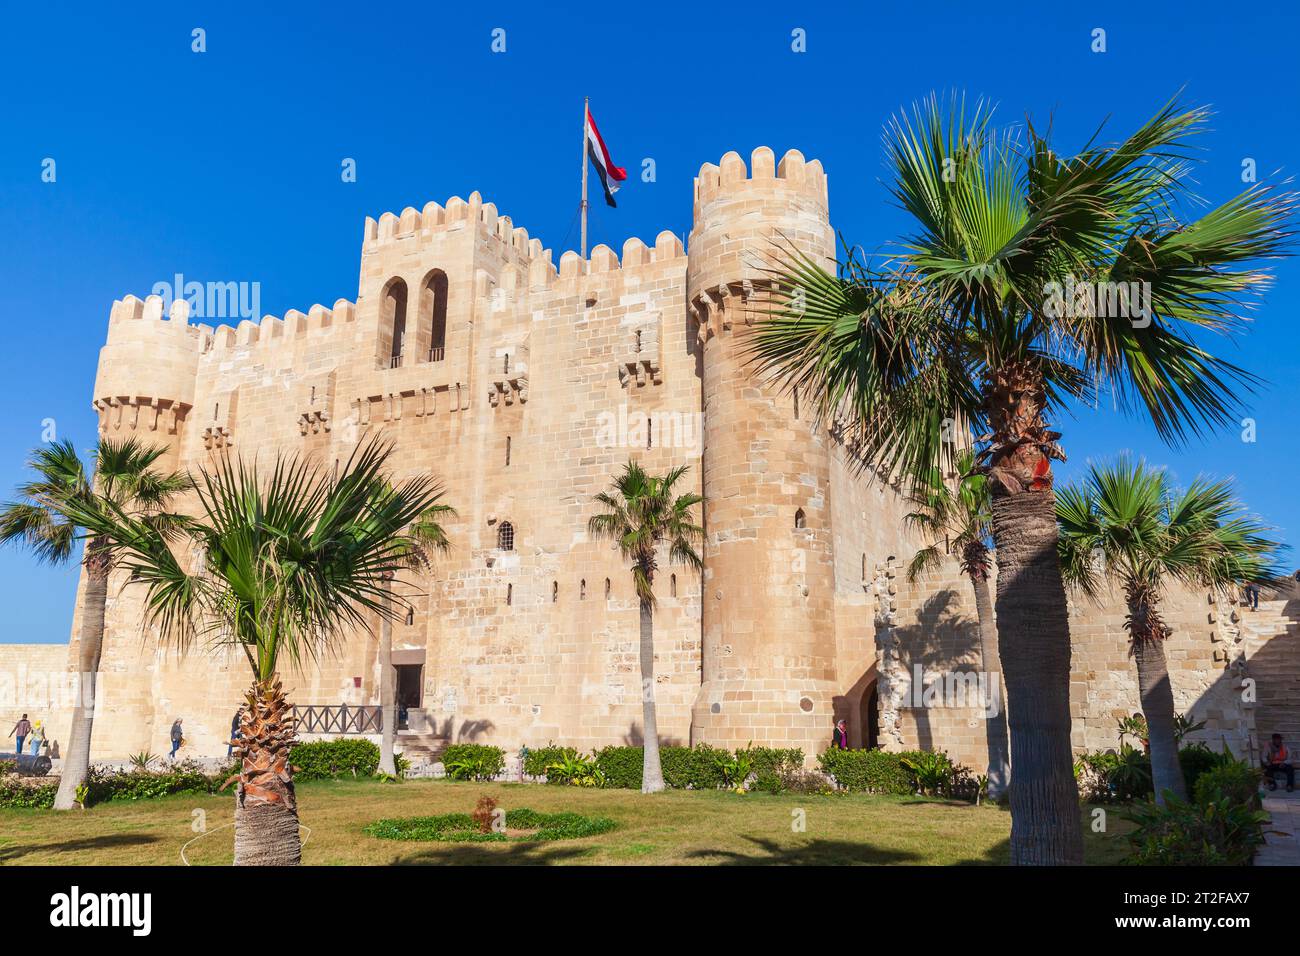 Alexandria, Egypt - December 14, 2018: Exterior of The Citadel of Qaitbay or the Fort of Qaitbay. This is a 15th-century defensive fortress located on Stock Photo